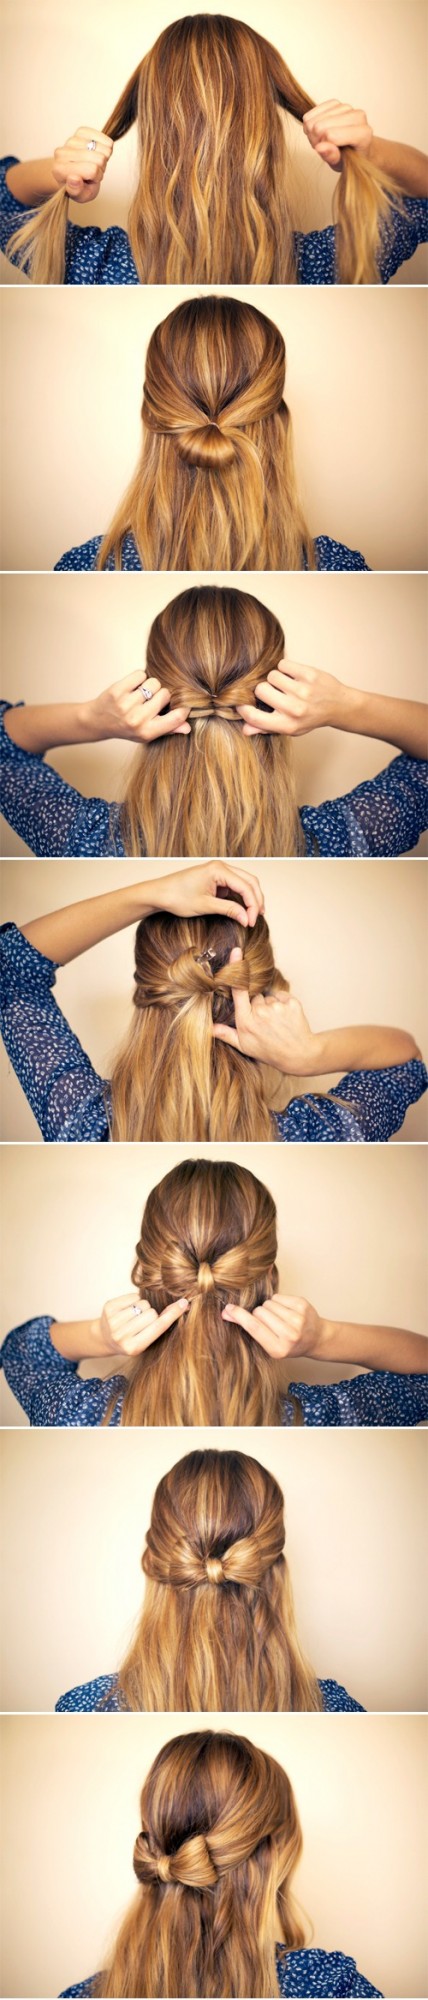 Perfect Hair Style for summer